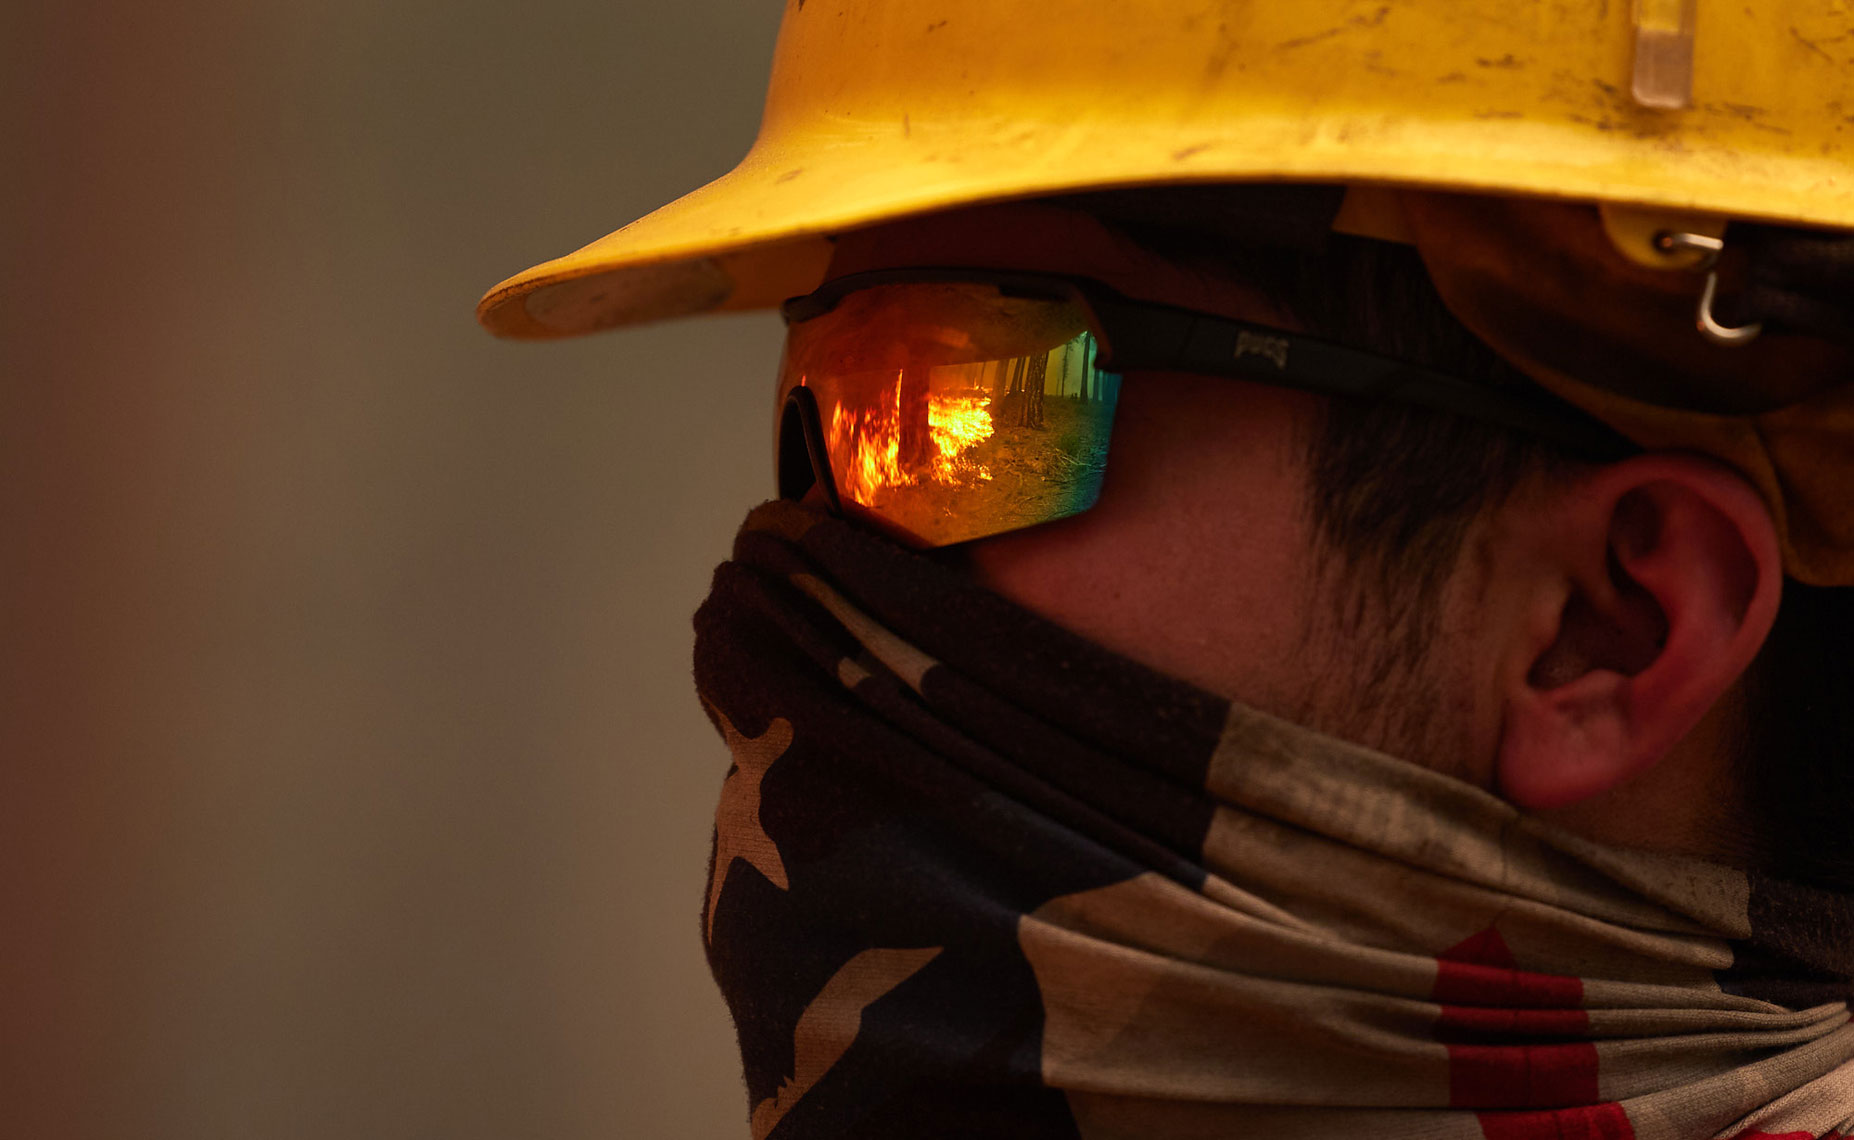 Fire Reflection in Firefighter